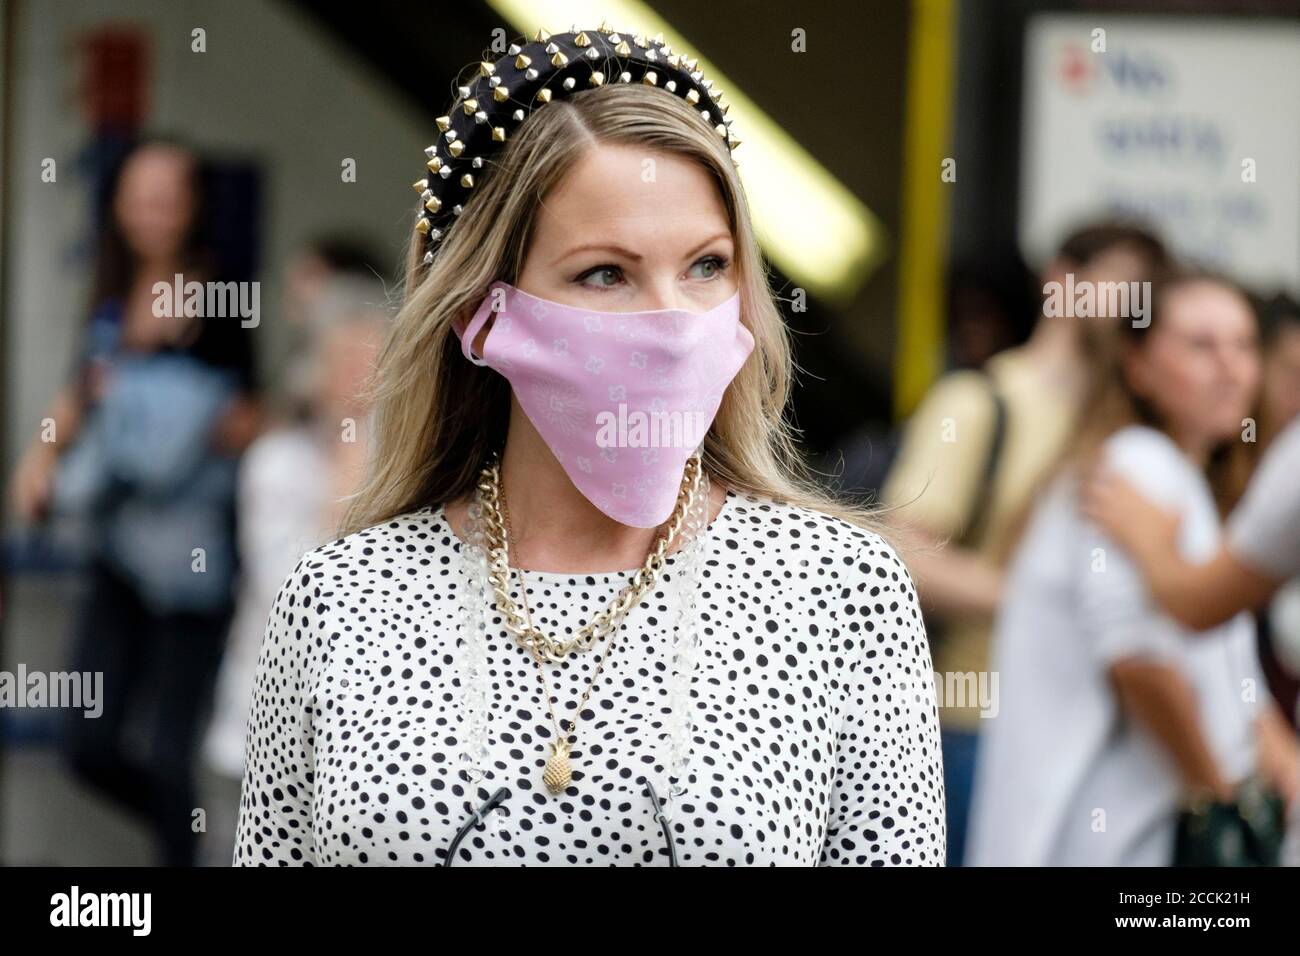 Smartly dressed young woman wearing designer face covering on busy street, London, UK Stock Photo